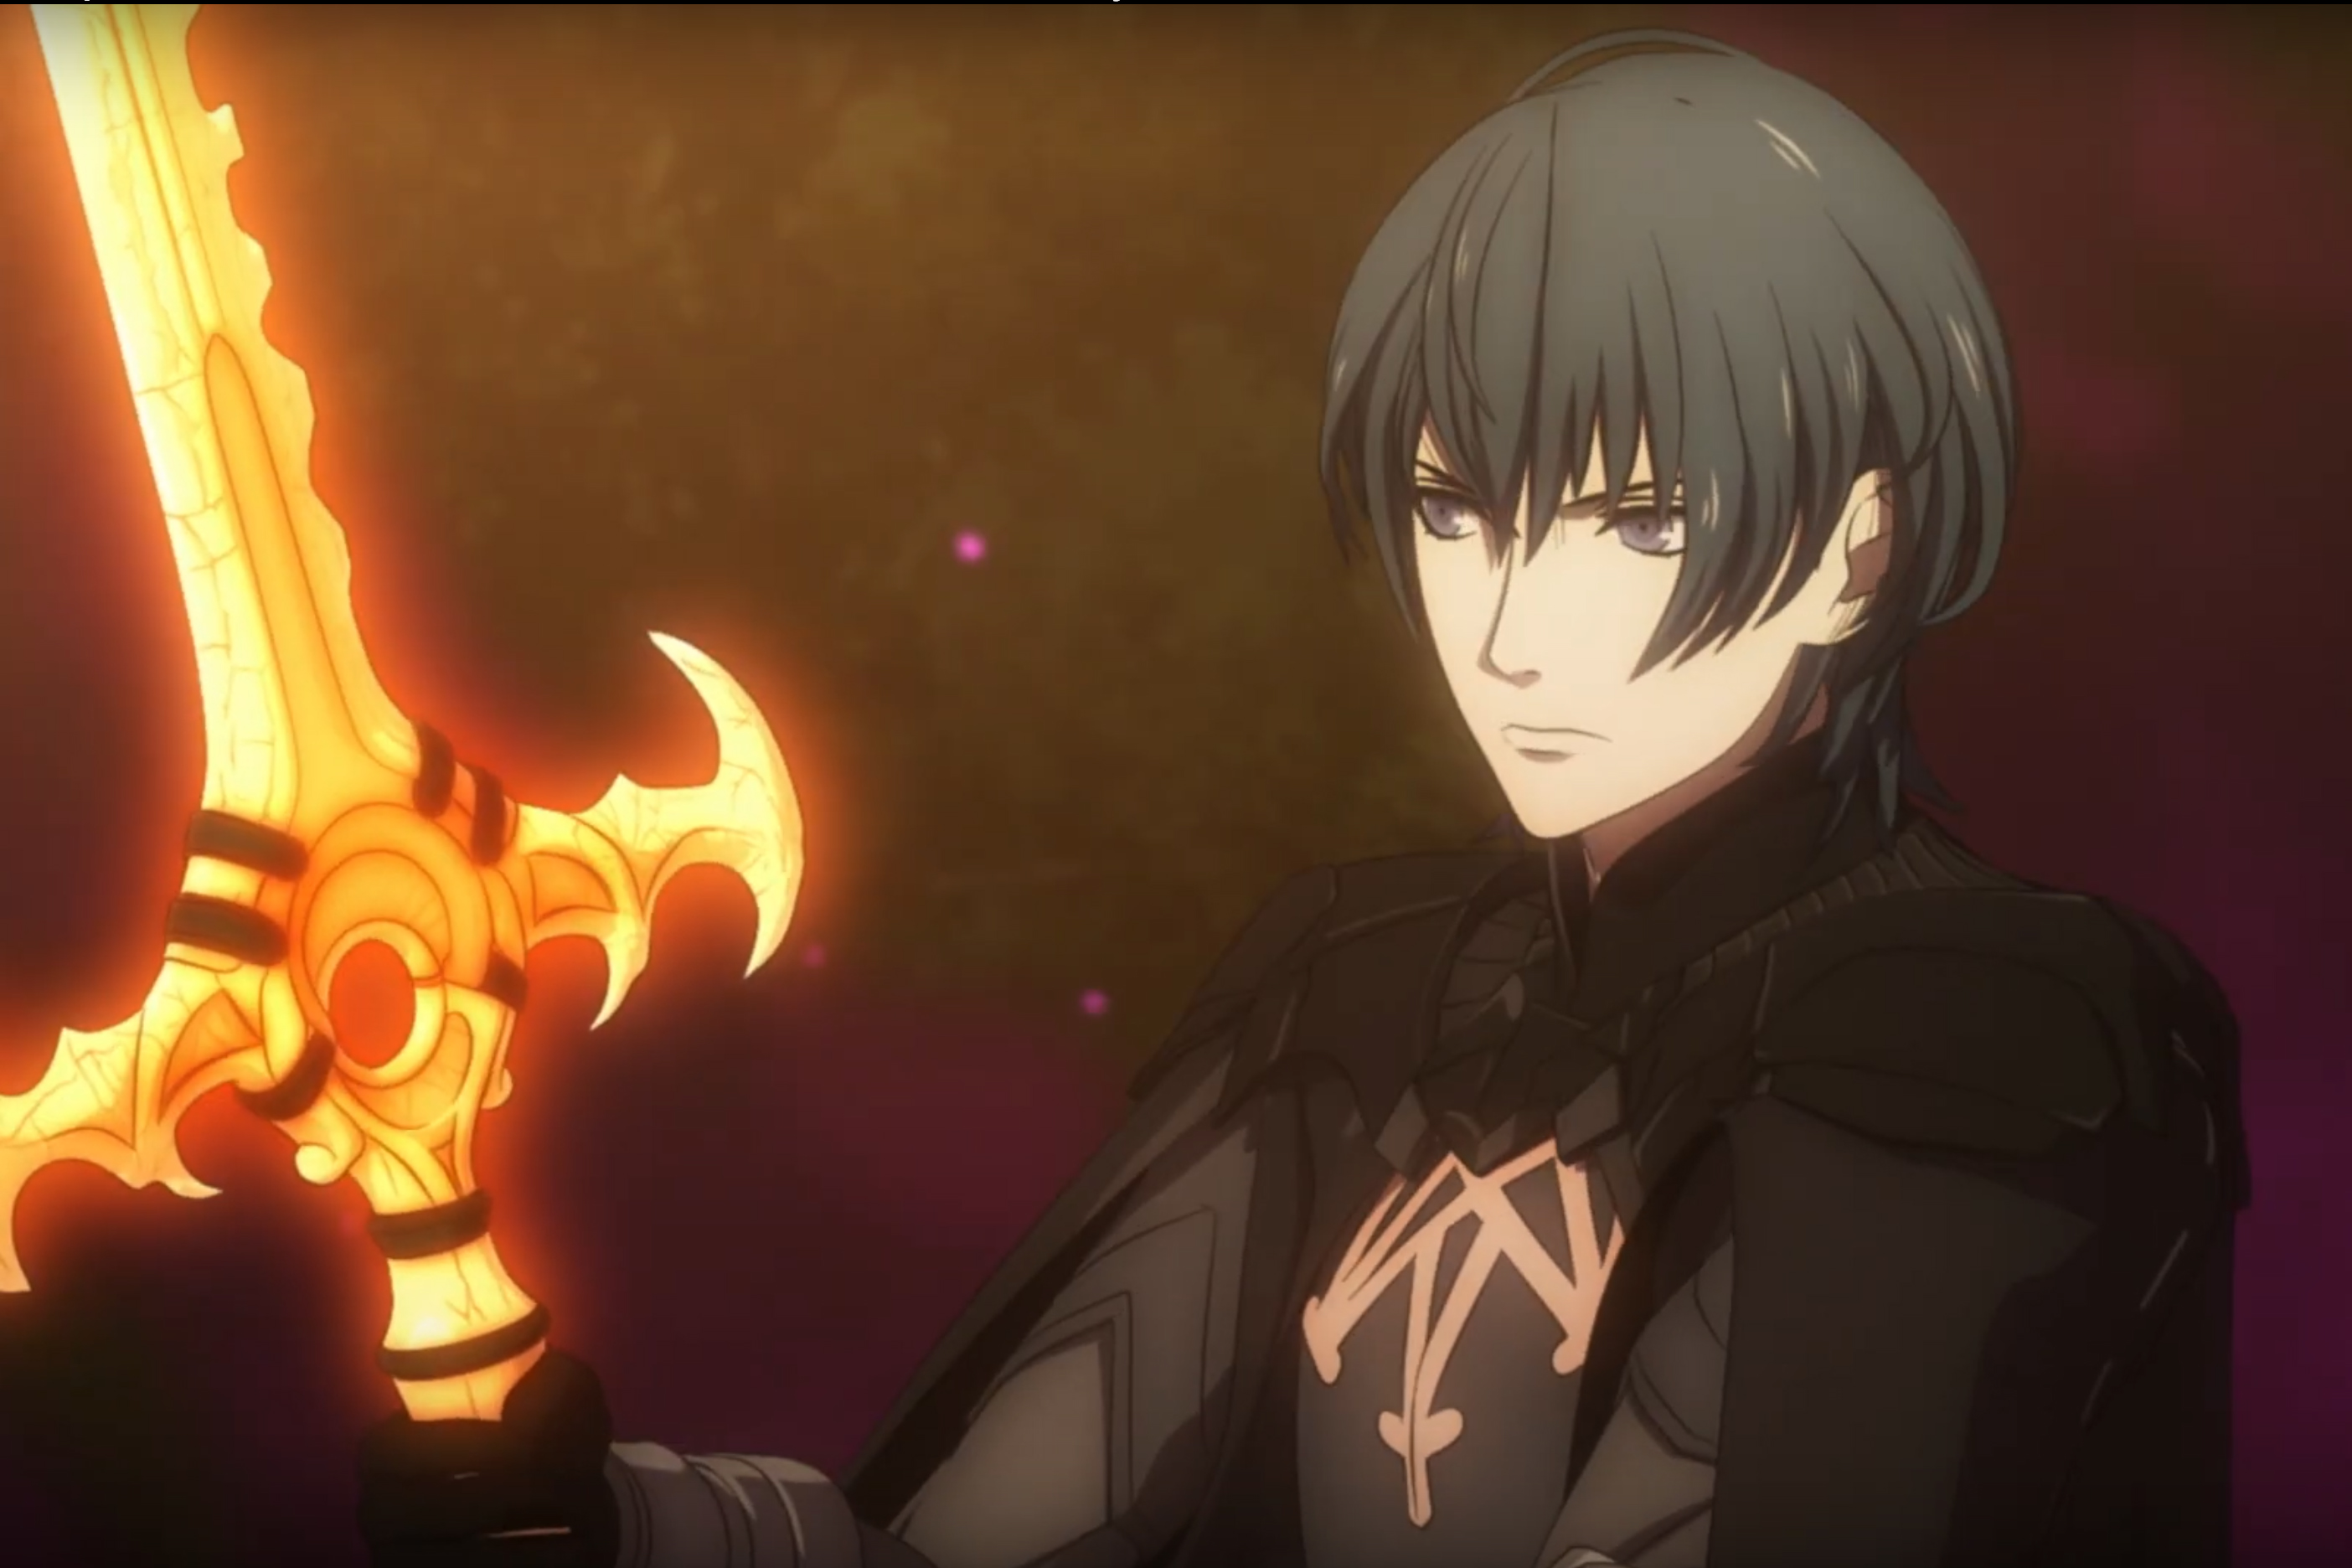 Fire Emblem: Three Houses protagonist Byleth is coming to Super Smash Bros....